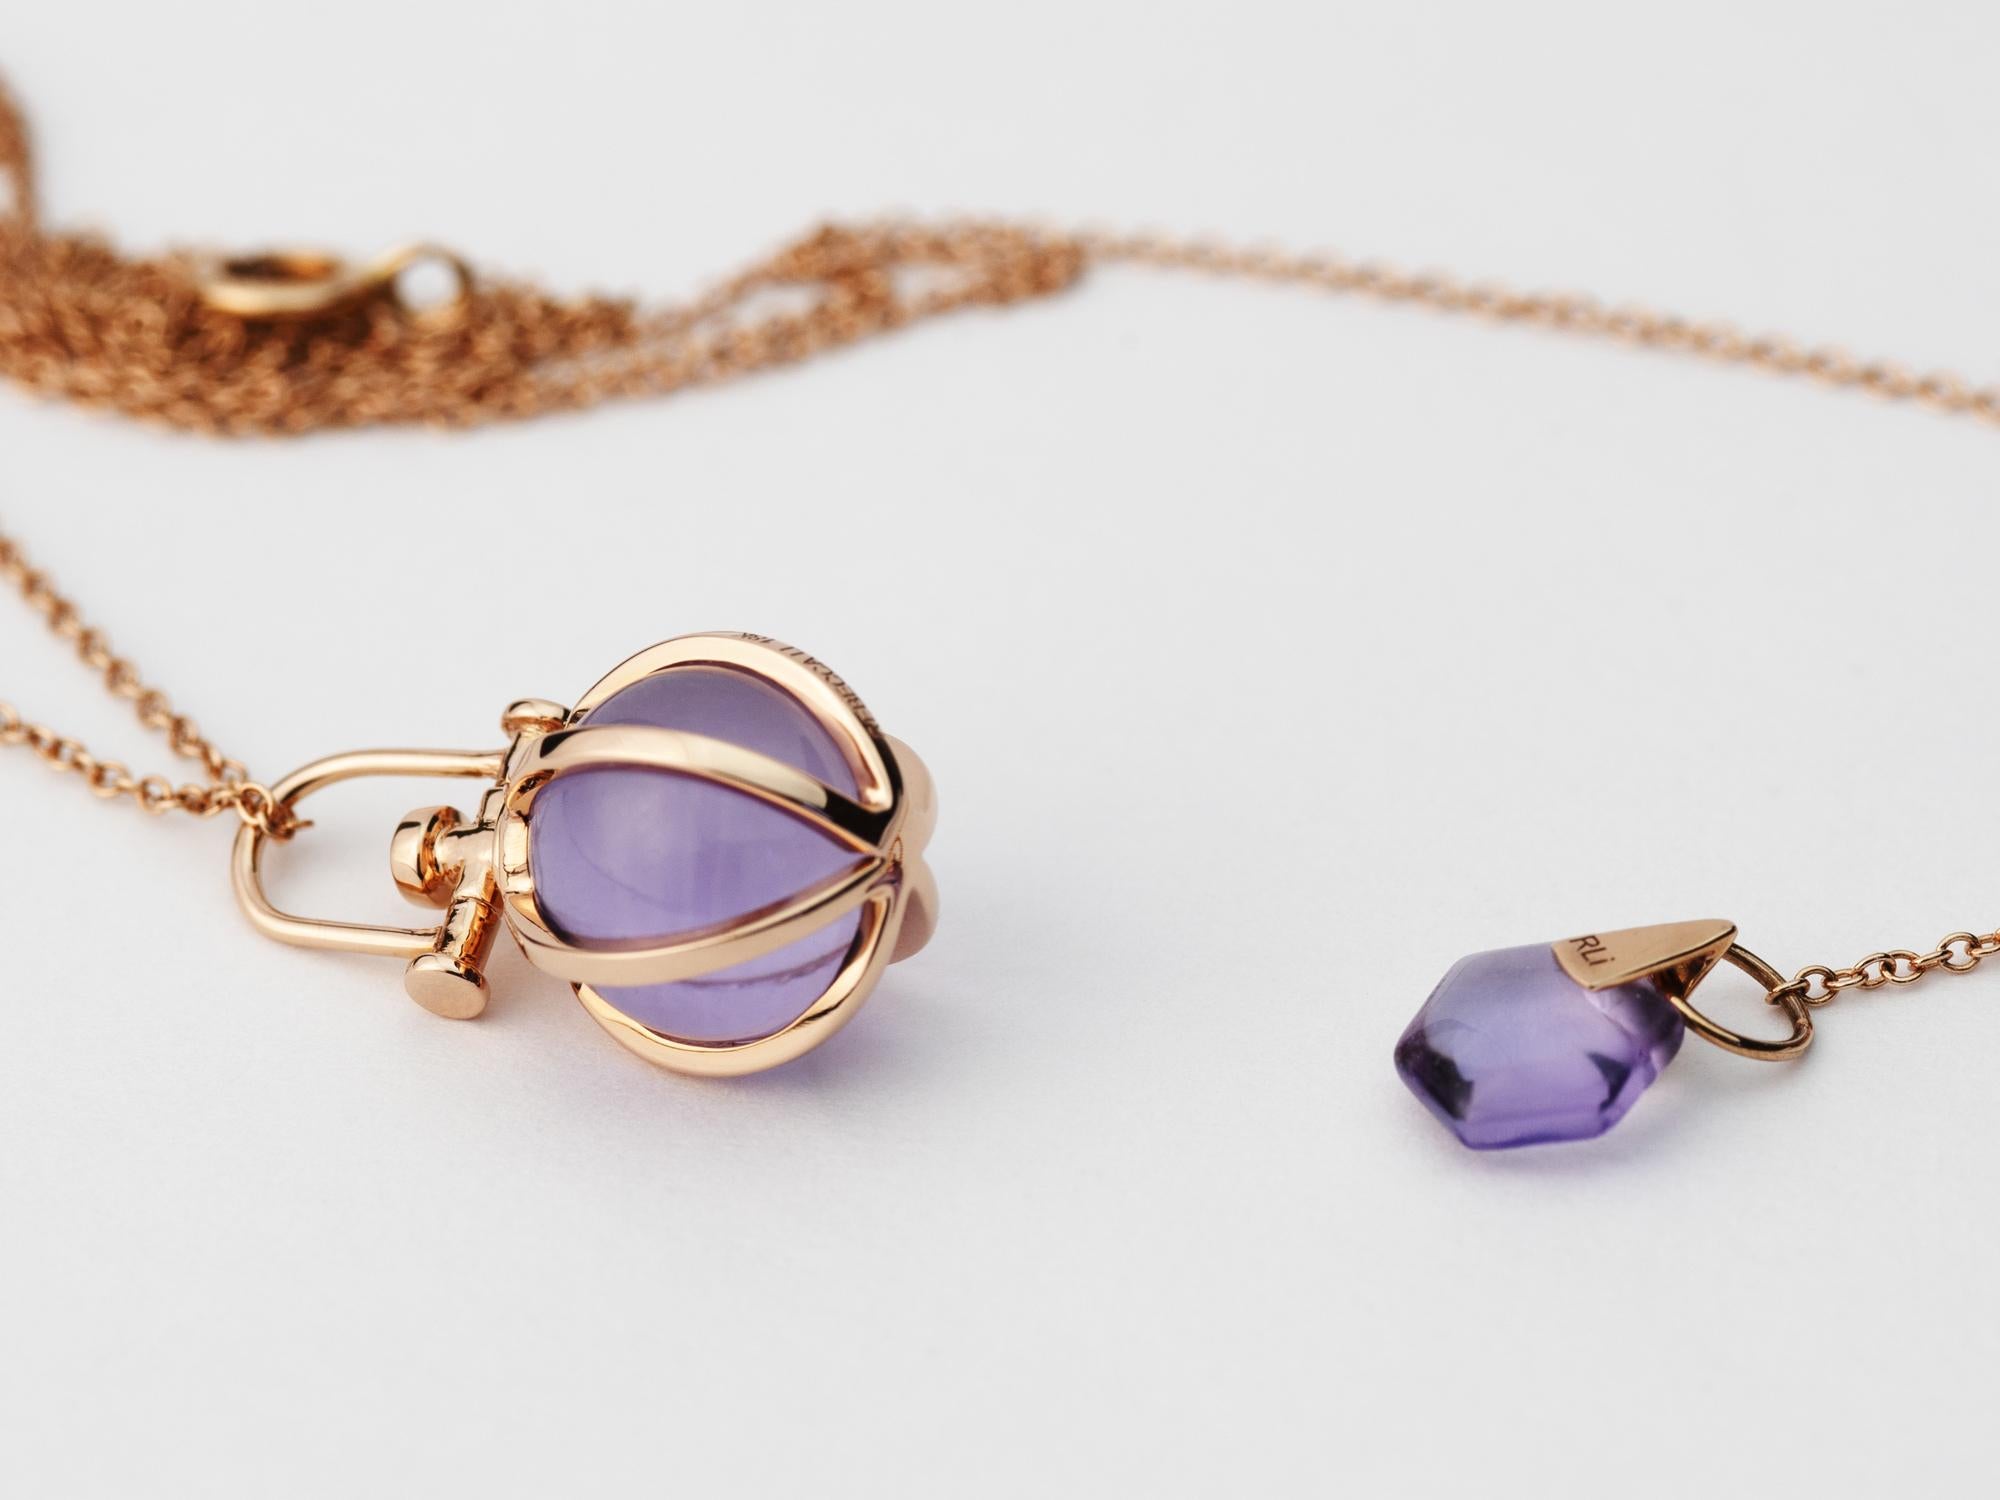 Rebecca Li designs mindfulness. 
This dainty orb necklace is from her Crystal Ball Collection.
Amethyst means Intuition, Creativity & Awakening.

Pendant:
Metal Type: 18K Rose Gold
Gemstone: Green Amethyst
Pendant Size: 9 mm W * 9 mm D * 17 mm